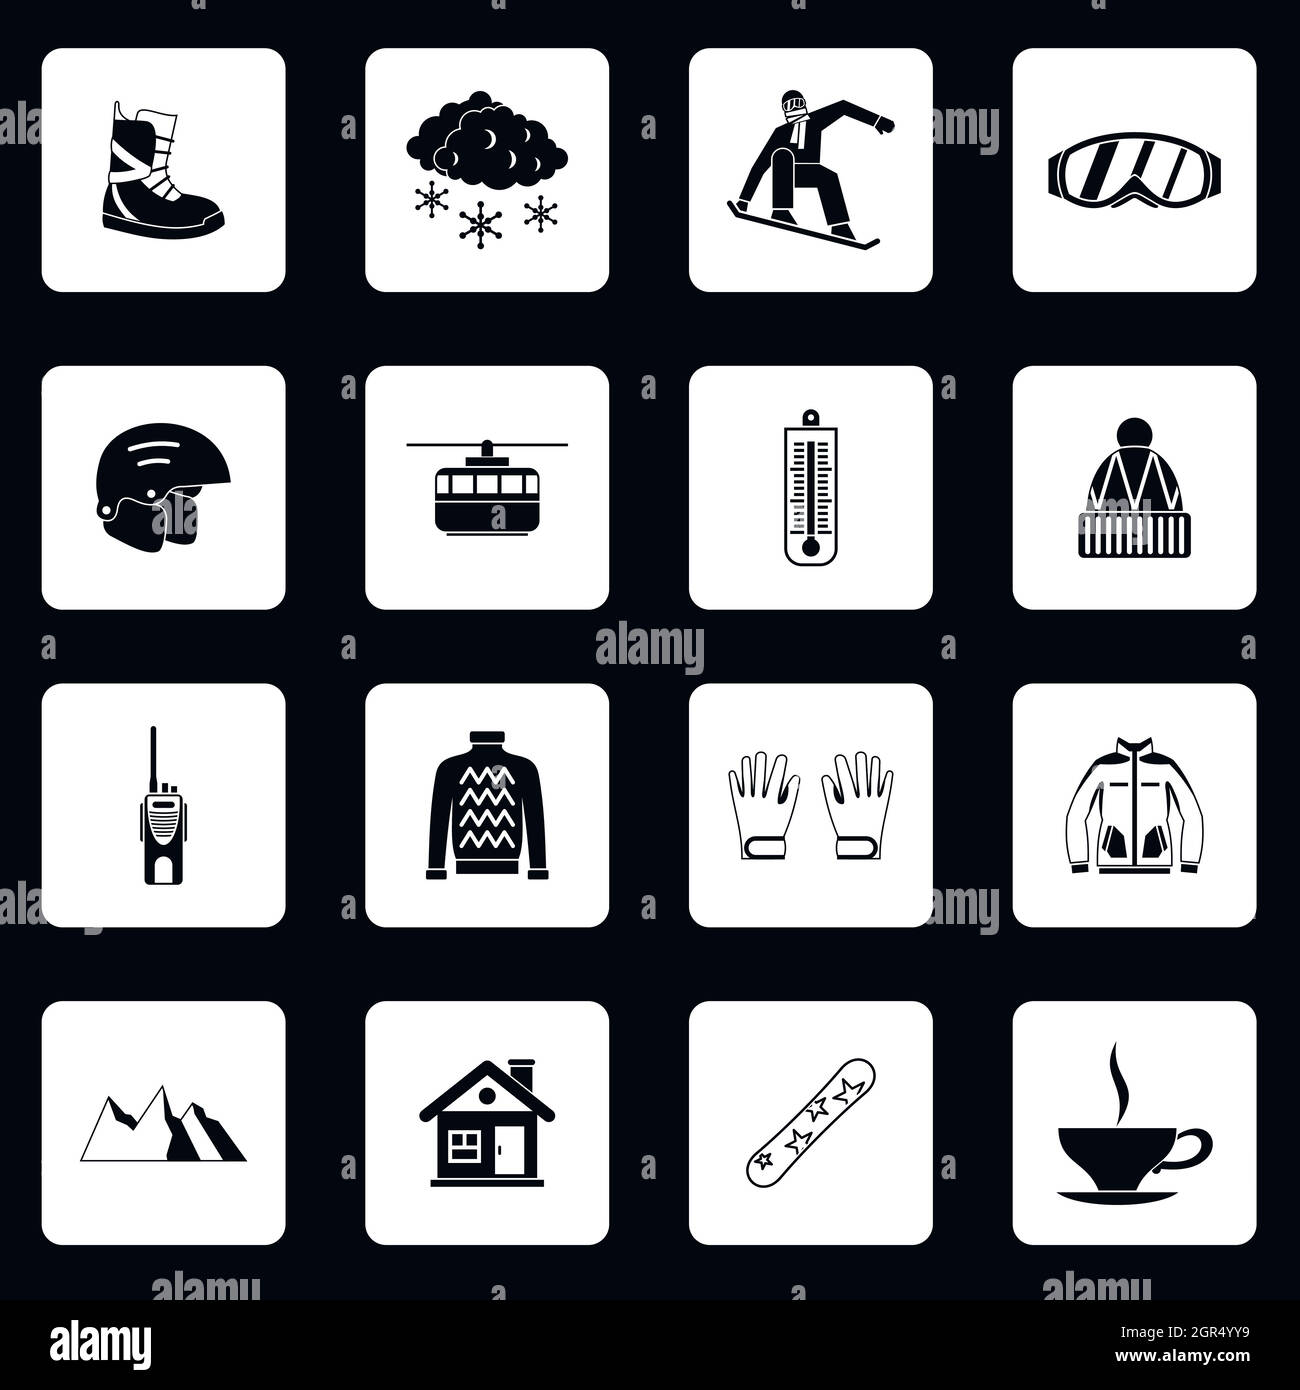 Snowboarding icons set, simple style Stock Vector